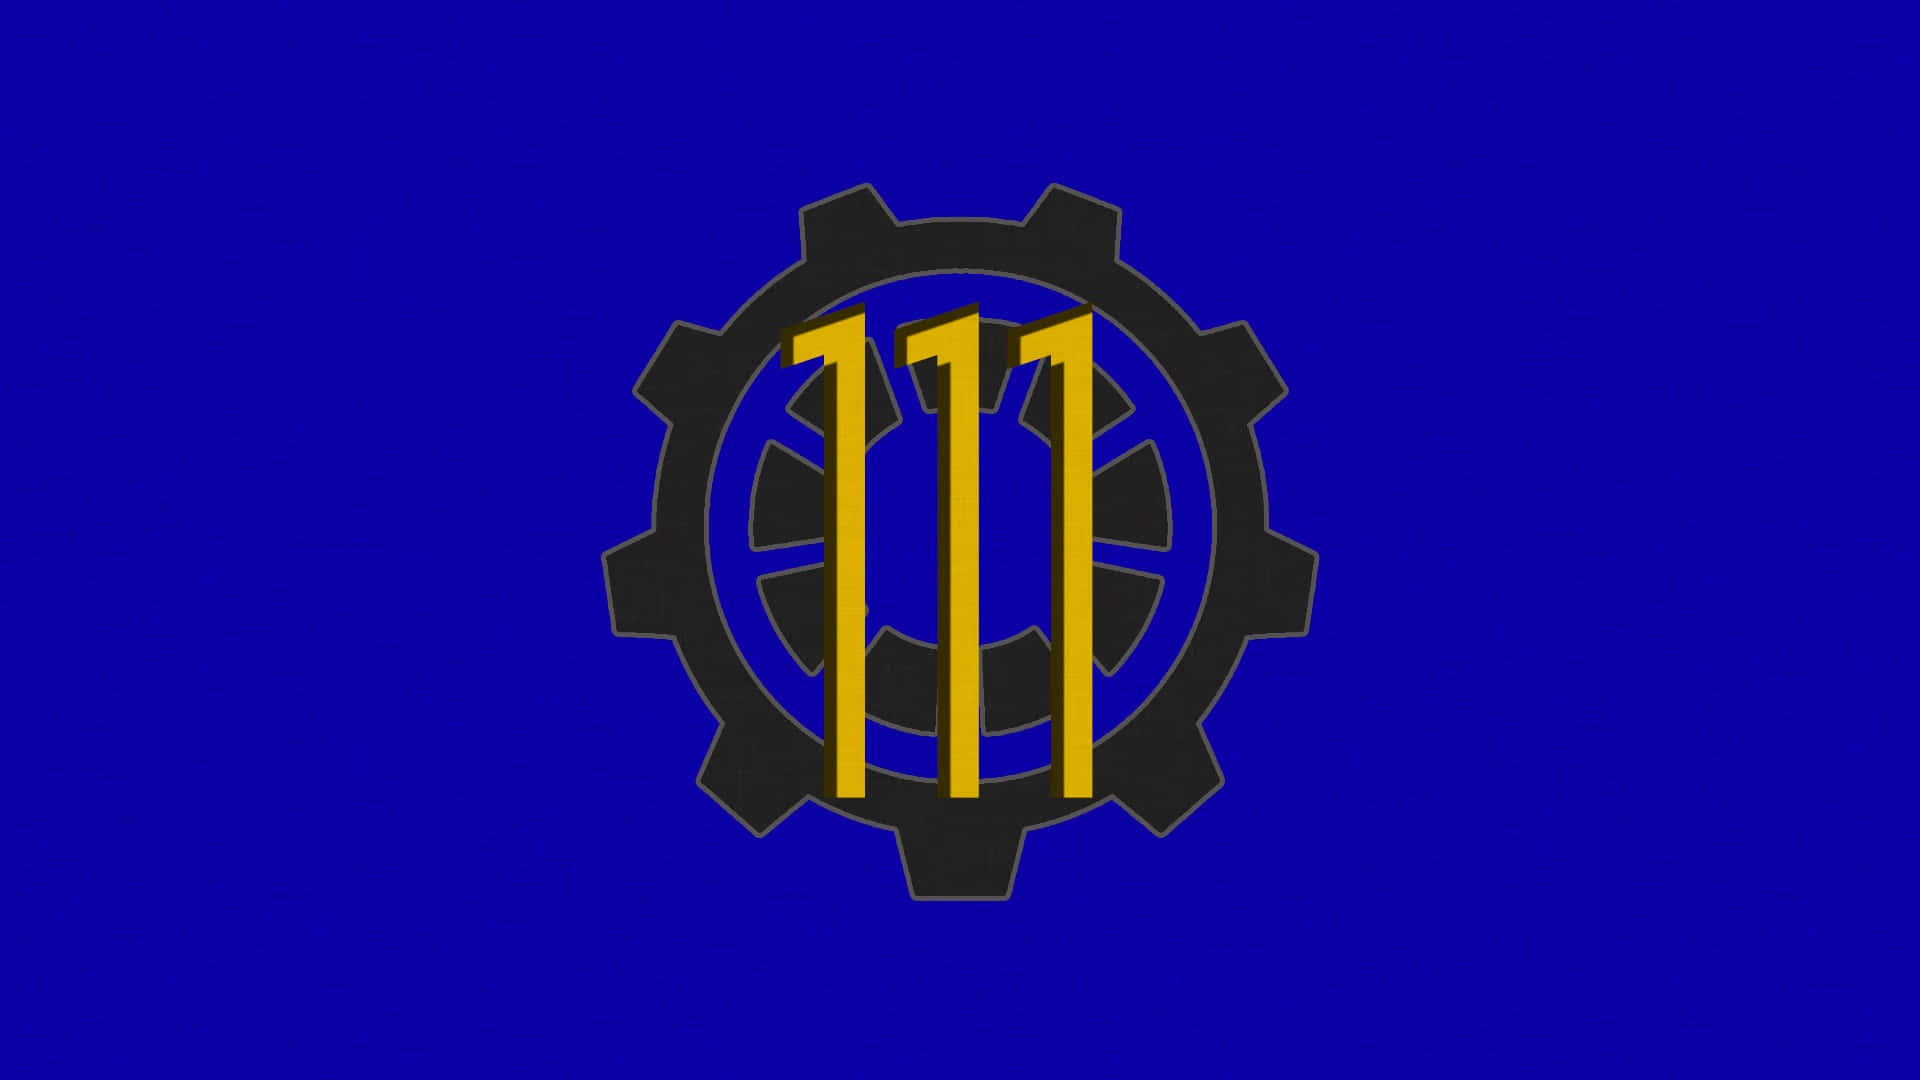 Vault-Tec Logo against Blue and Yellow Dynamic Background Wallpaper